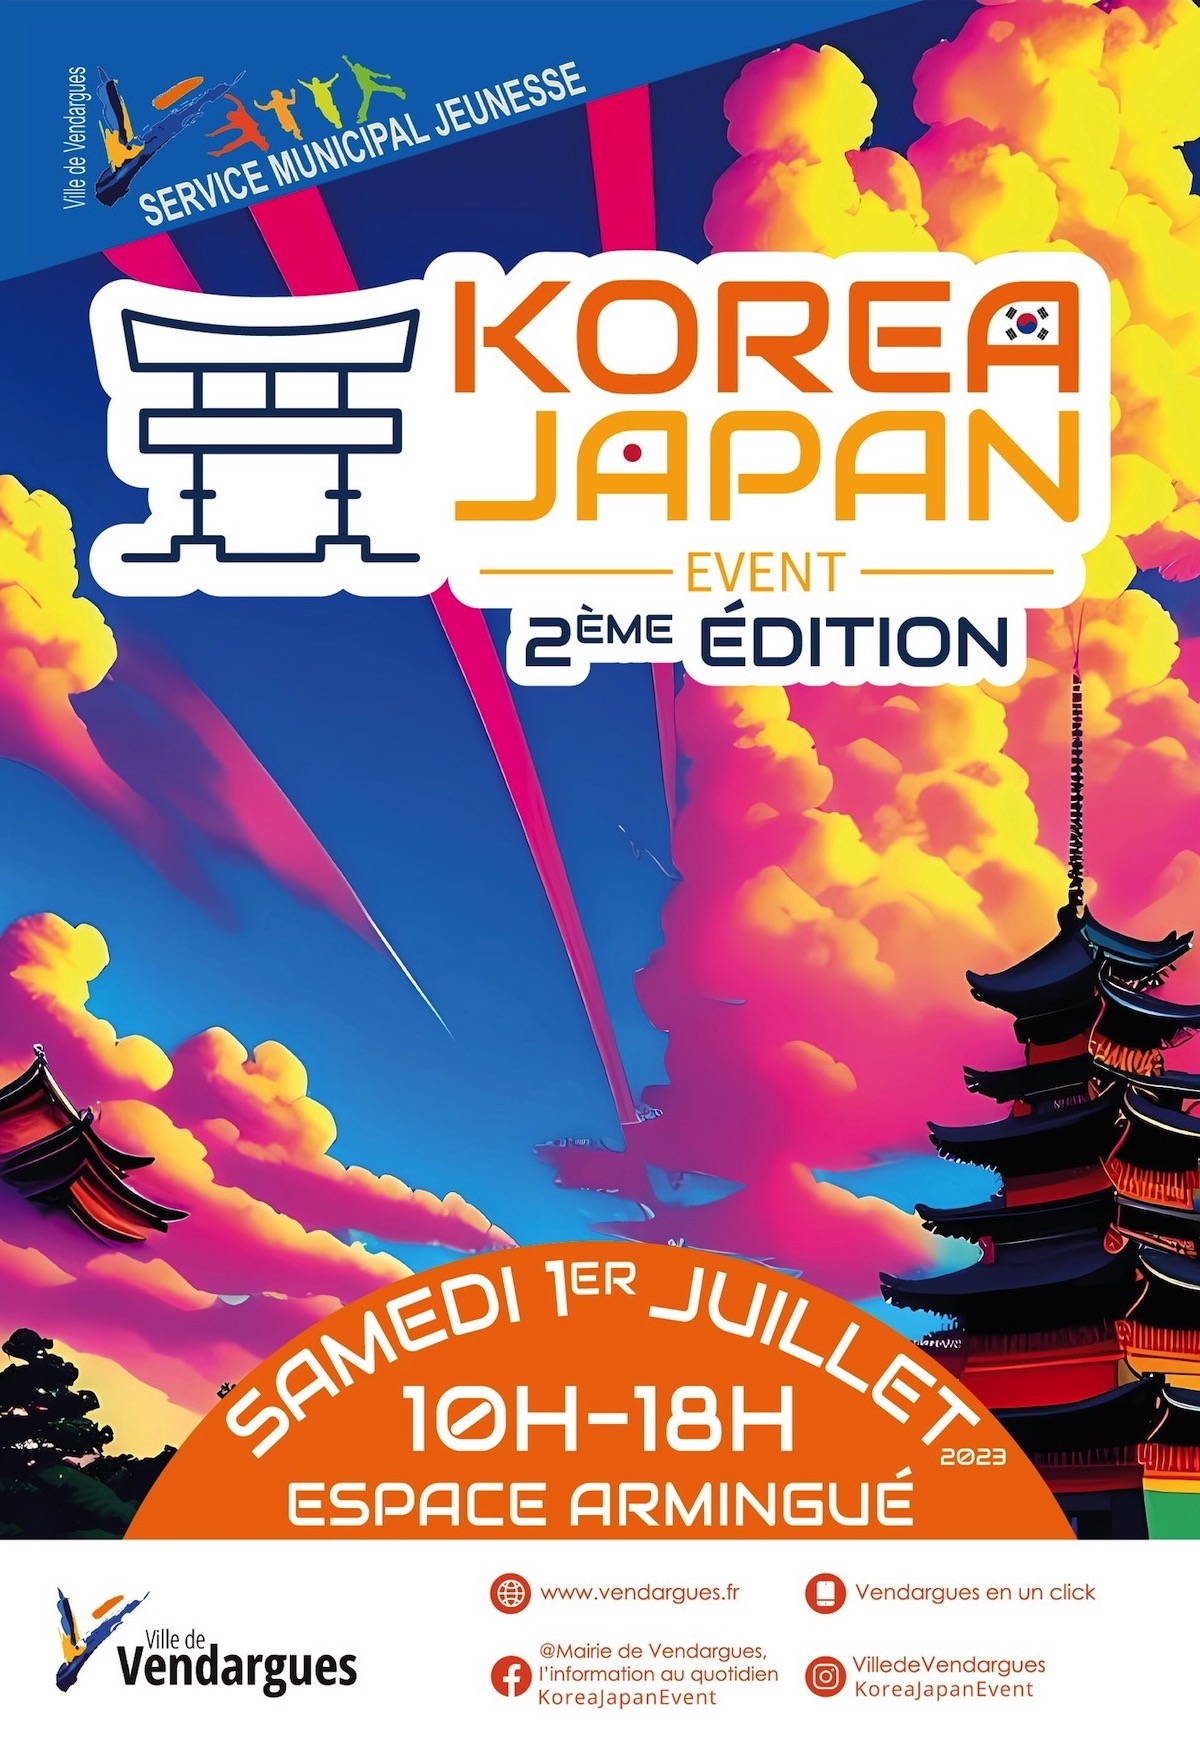 ALIORE will be at the Korea Japan Event!